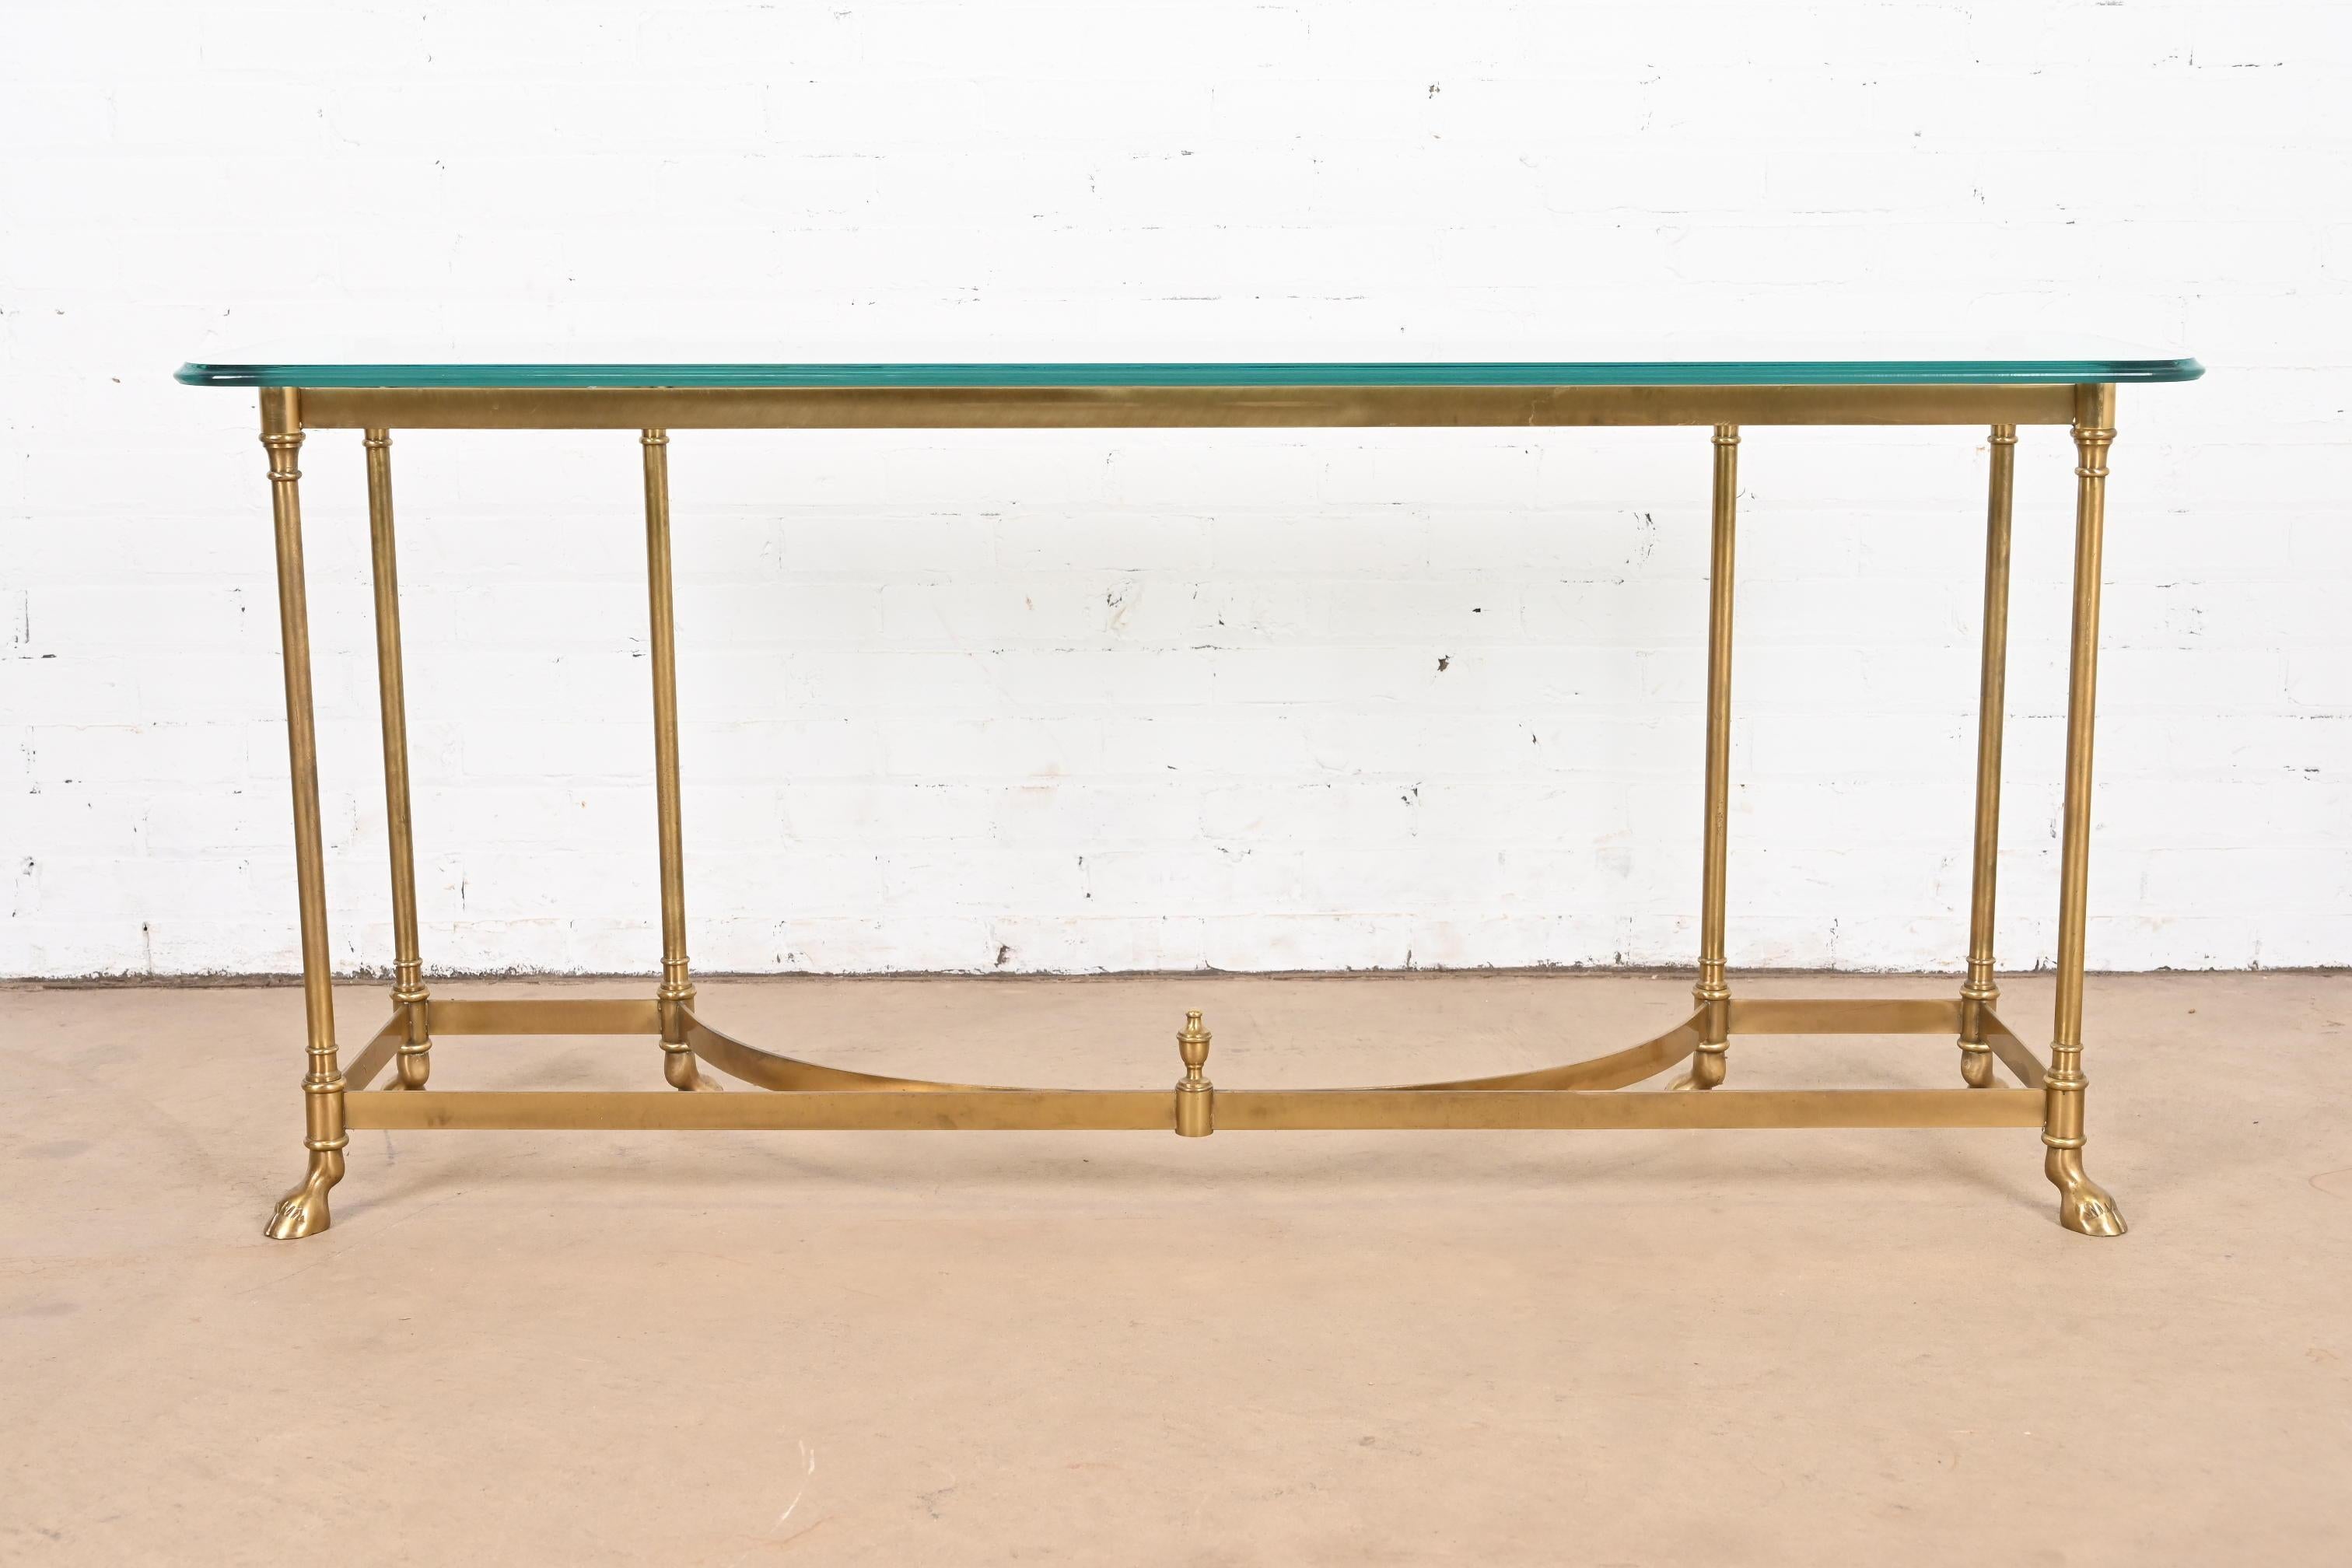 Labarge Hollywood Regency Brass and Glass Hooved Feet Console Table, Circa 1960s For Sale 8